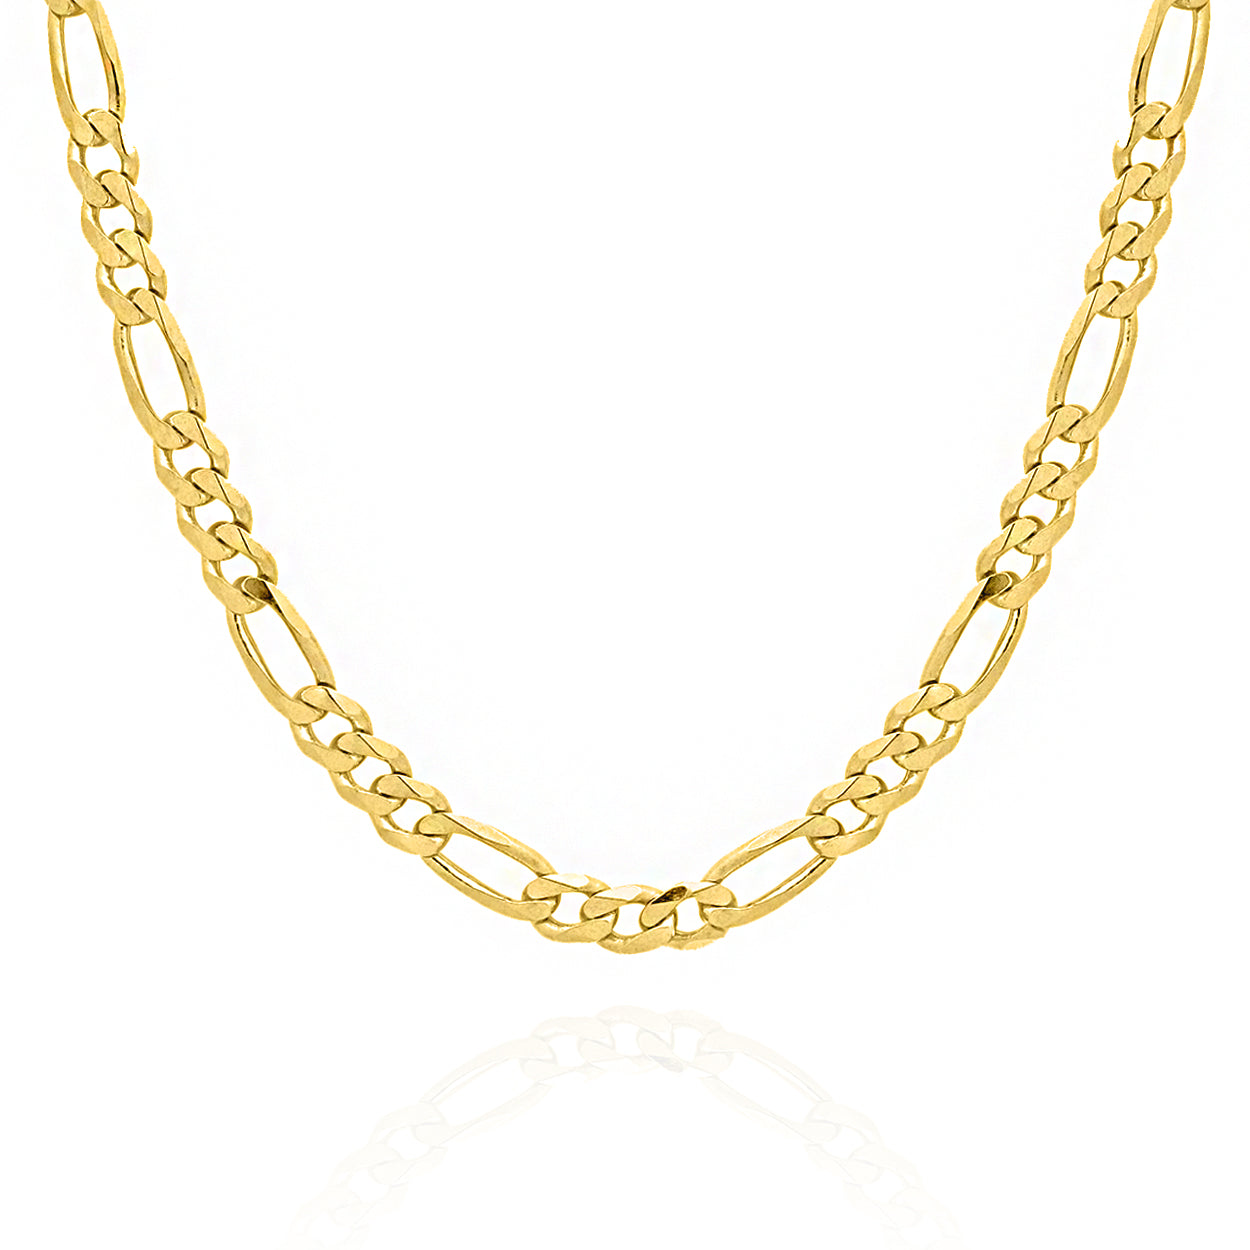 5mm Wide Figaro Style Chain Solid Gold Yellow